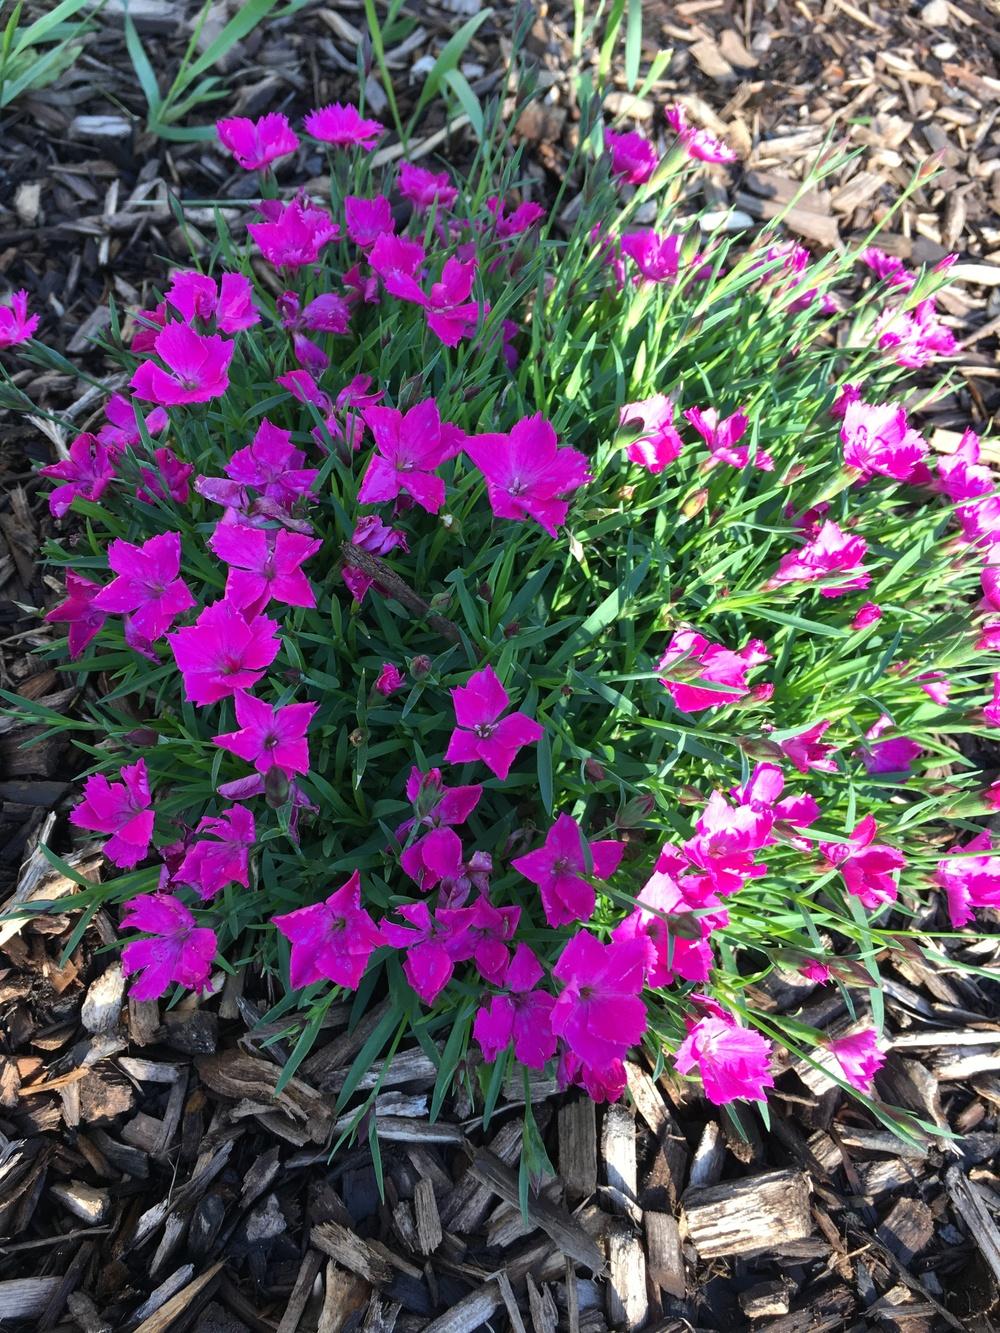 Photo of Dianthus uploaded by jkaufman84